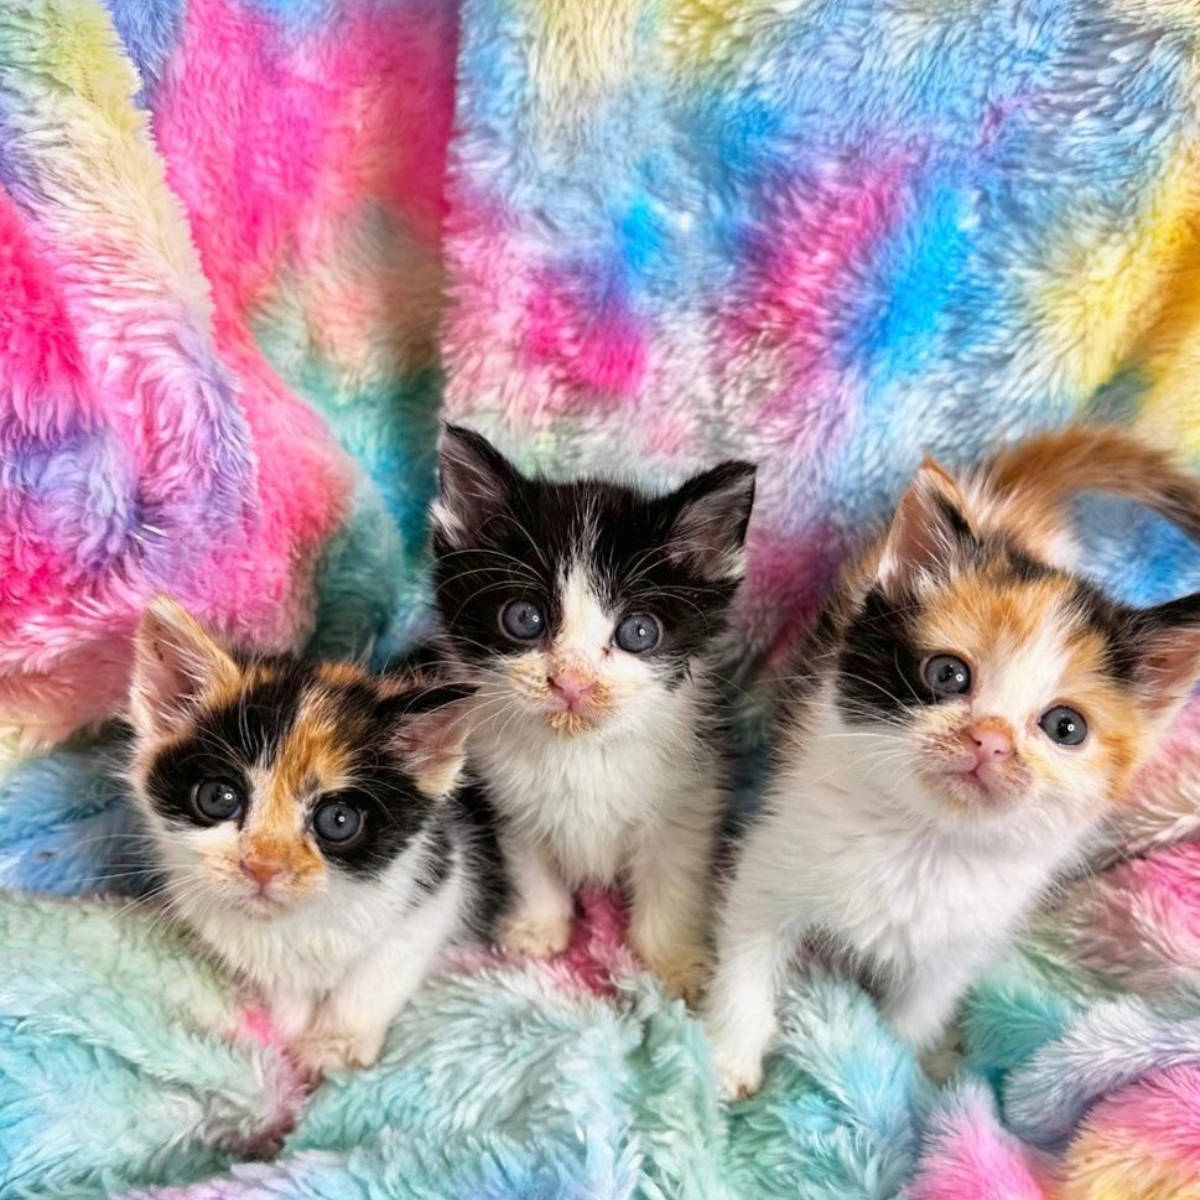 photo of kittens on a colorful blanket